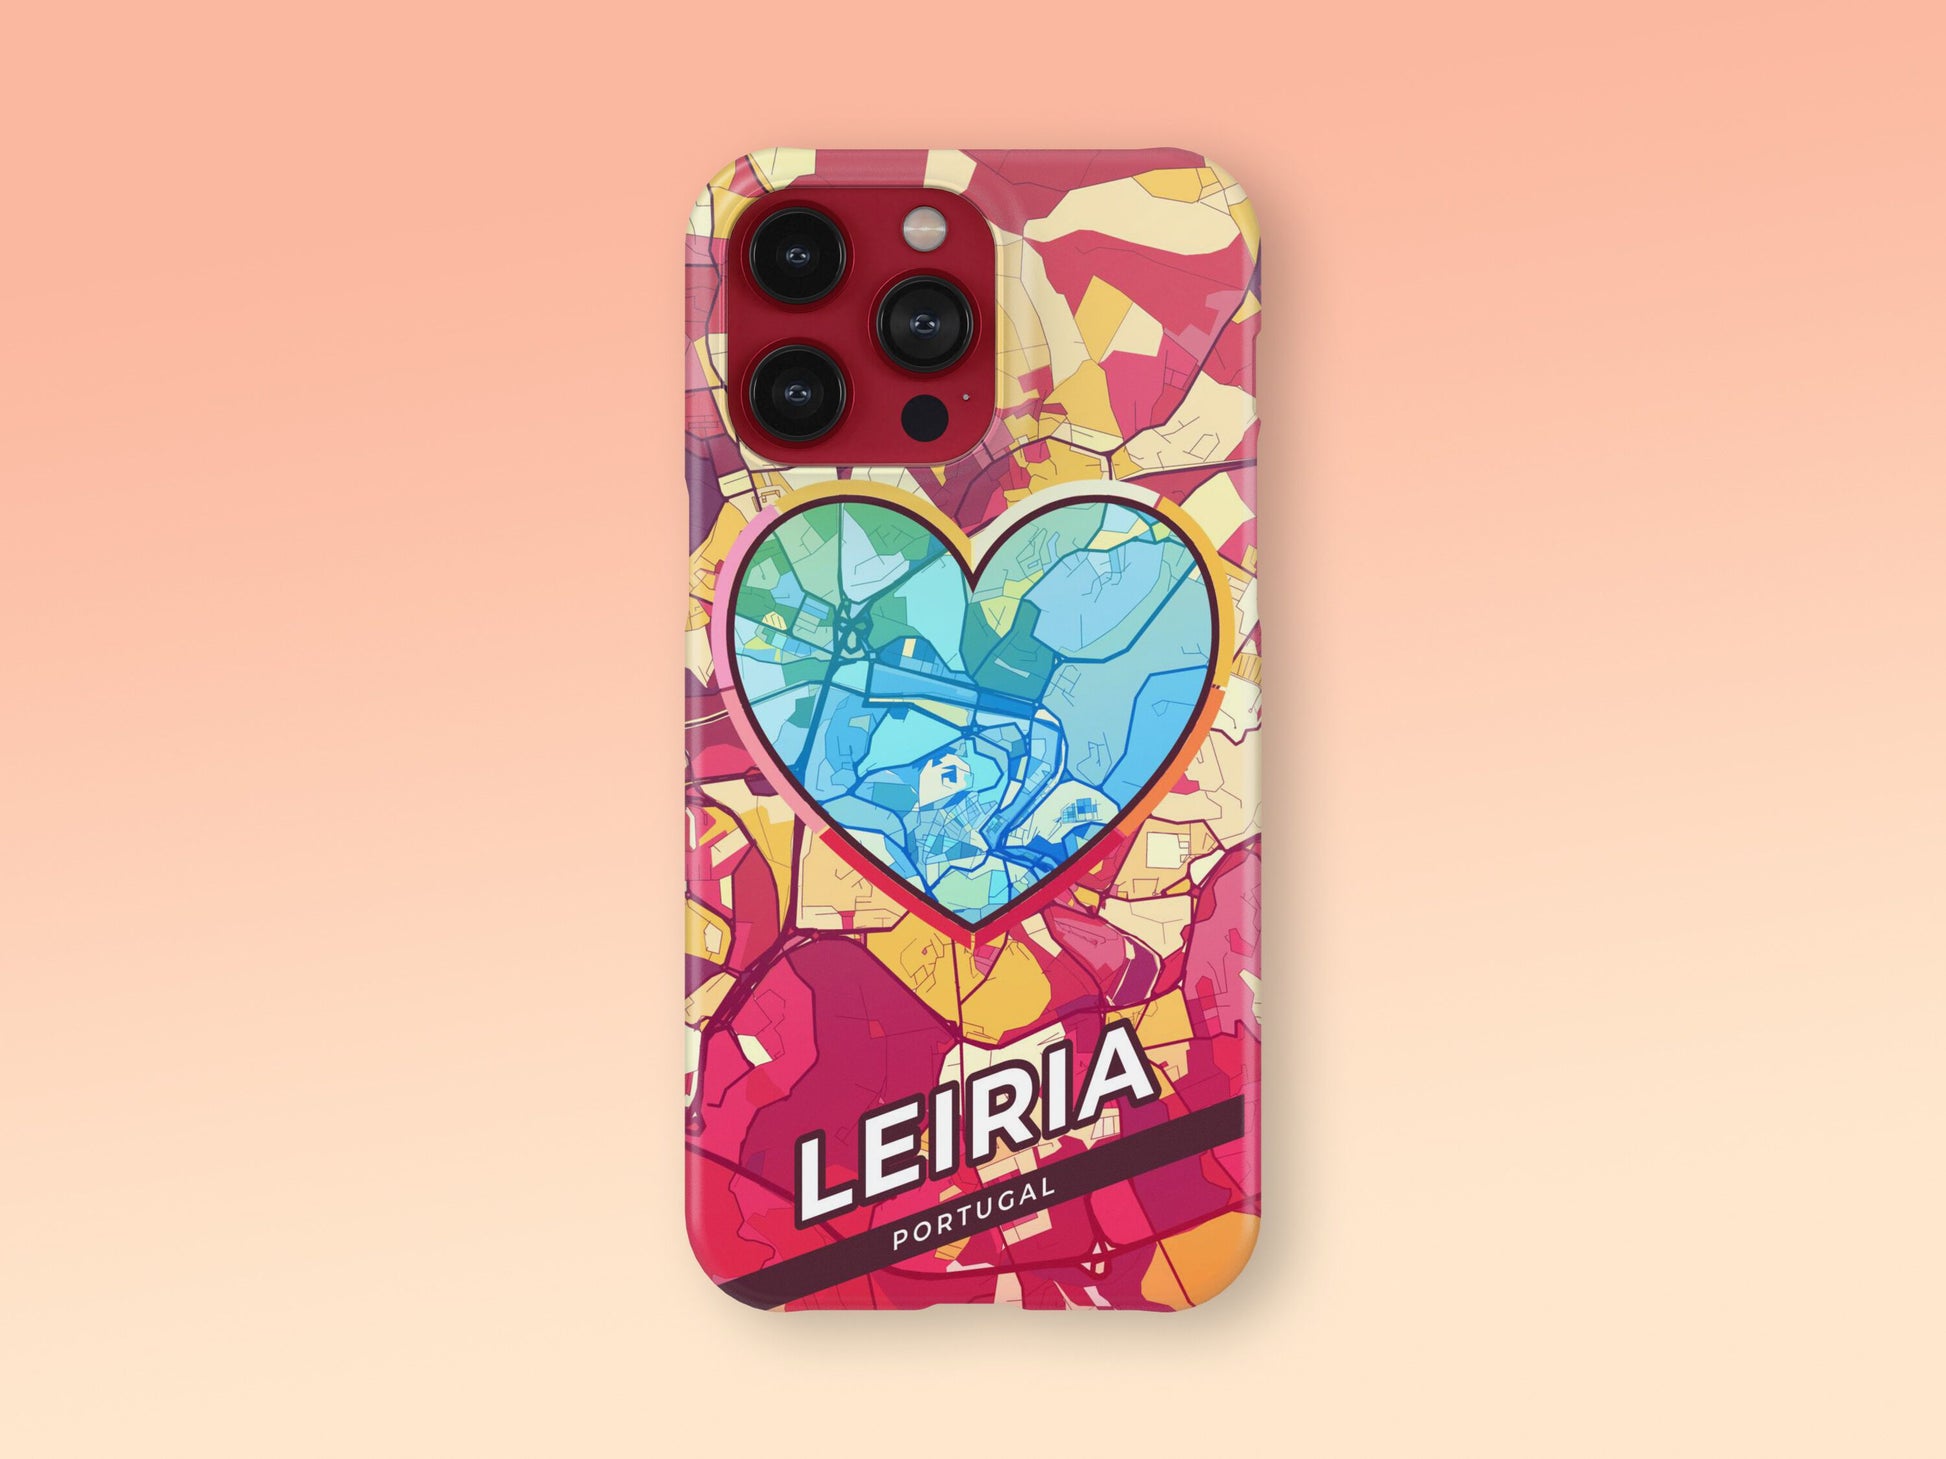 Leiria Portugal slim phone case with colorful icon. Birthday, wedding or housewarming gift. Couple match cases. 2